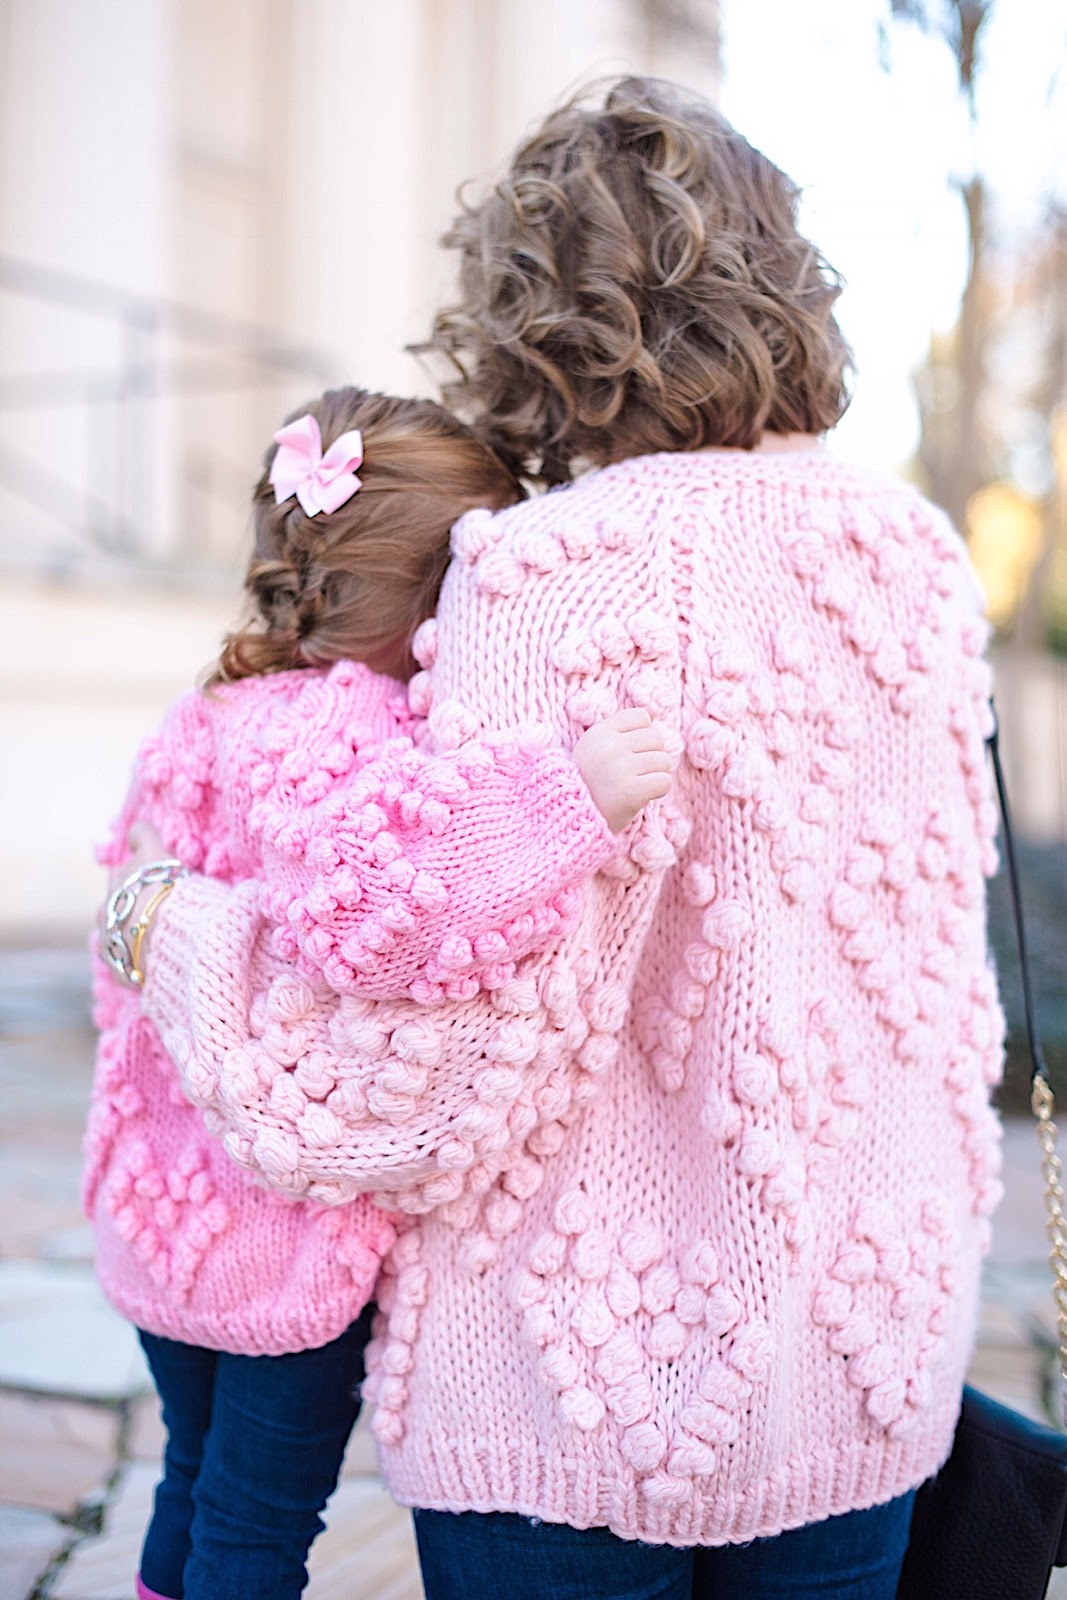 Mommy and Me Matching Heart Cardigans - All details can be found on Something Delightful Blog